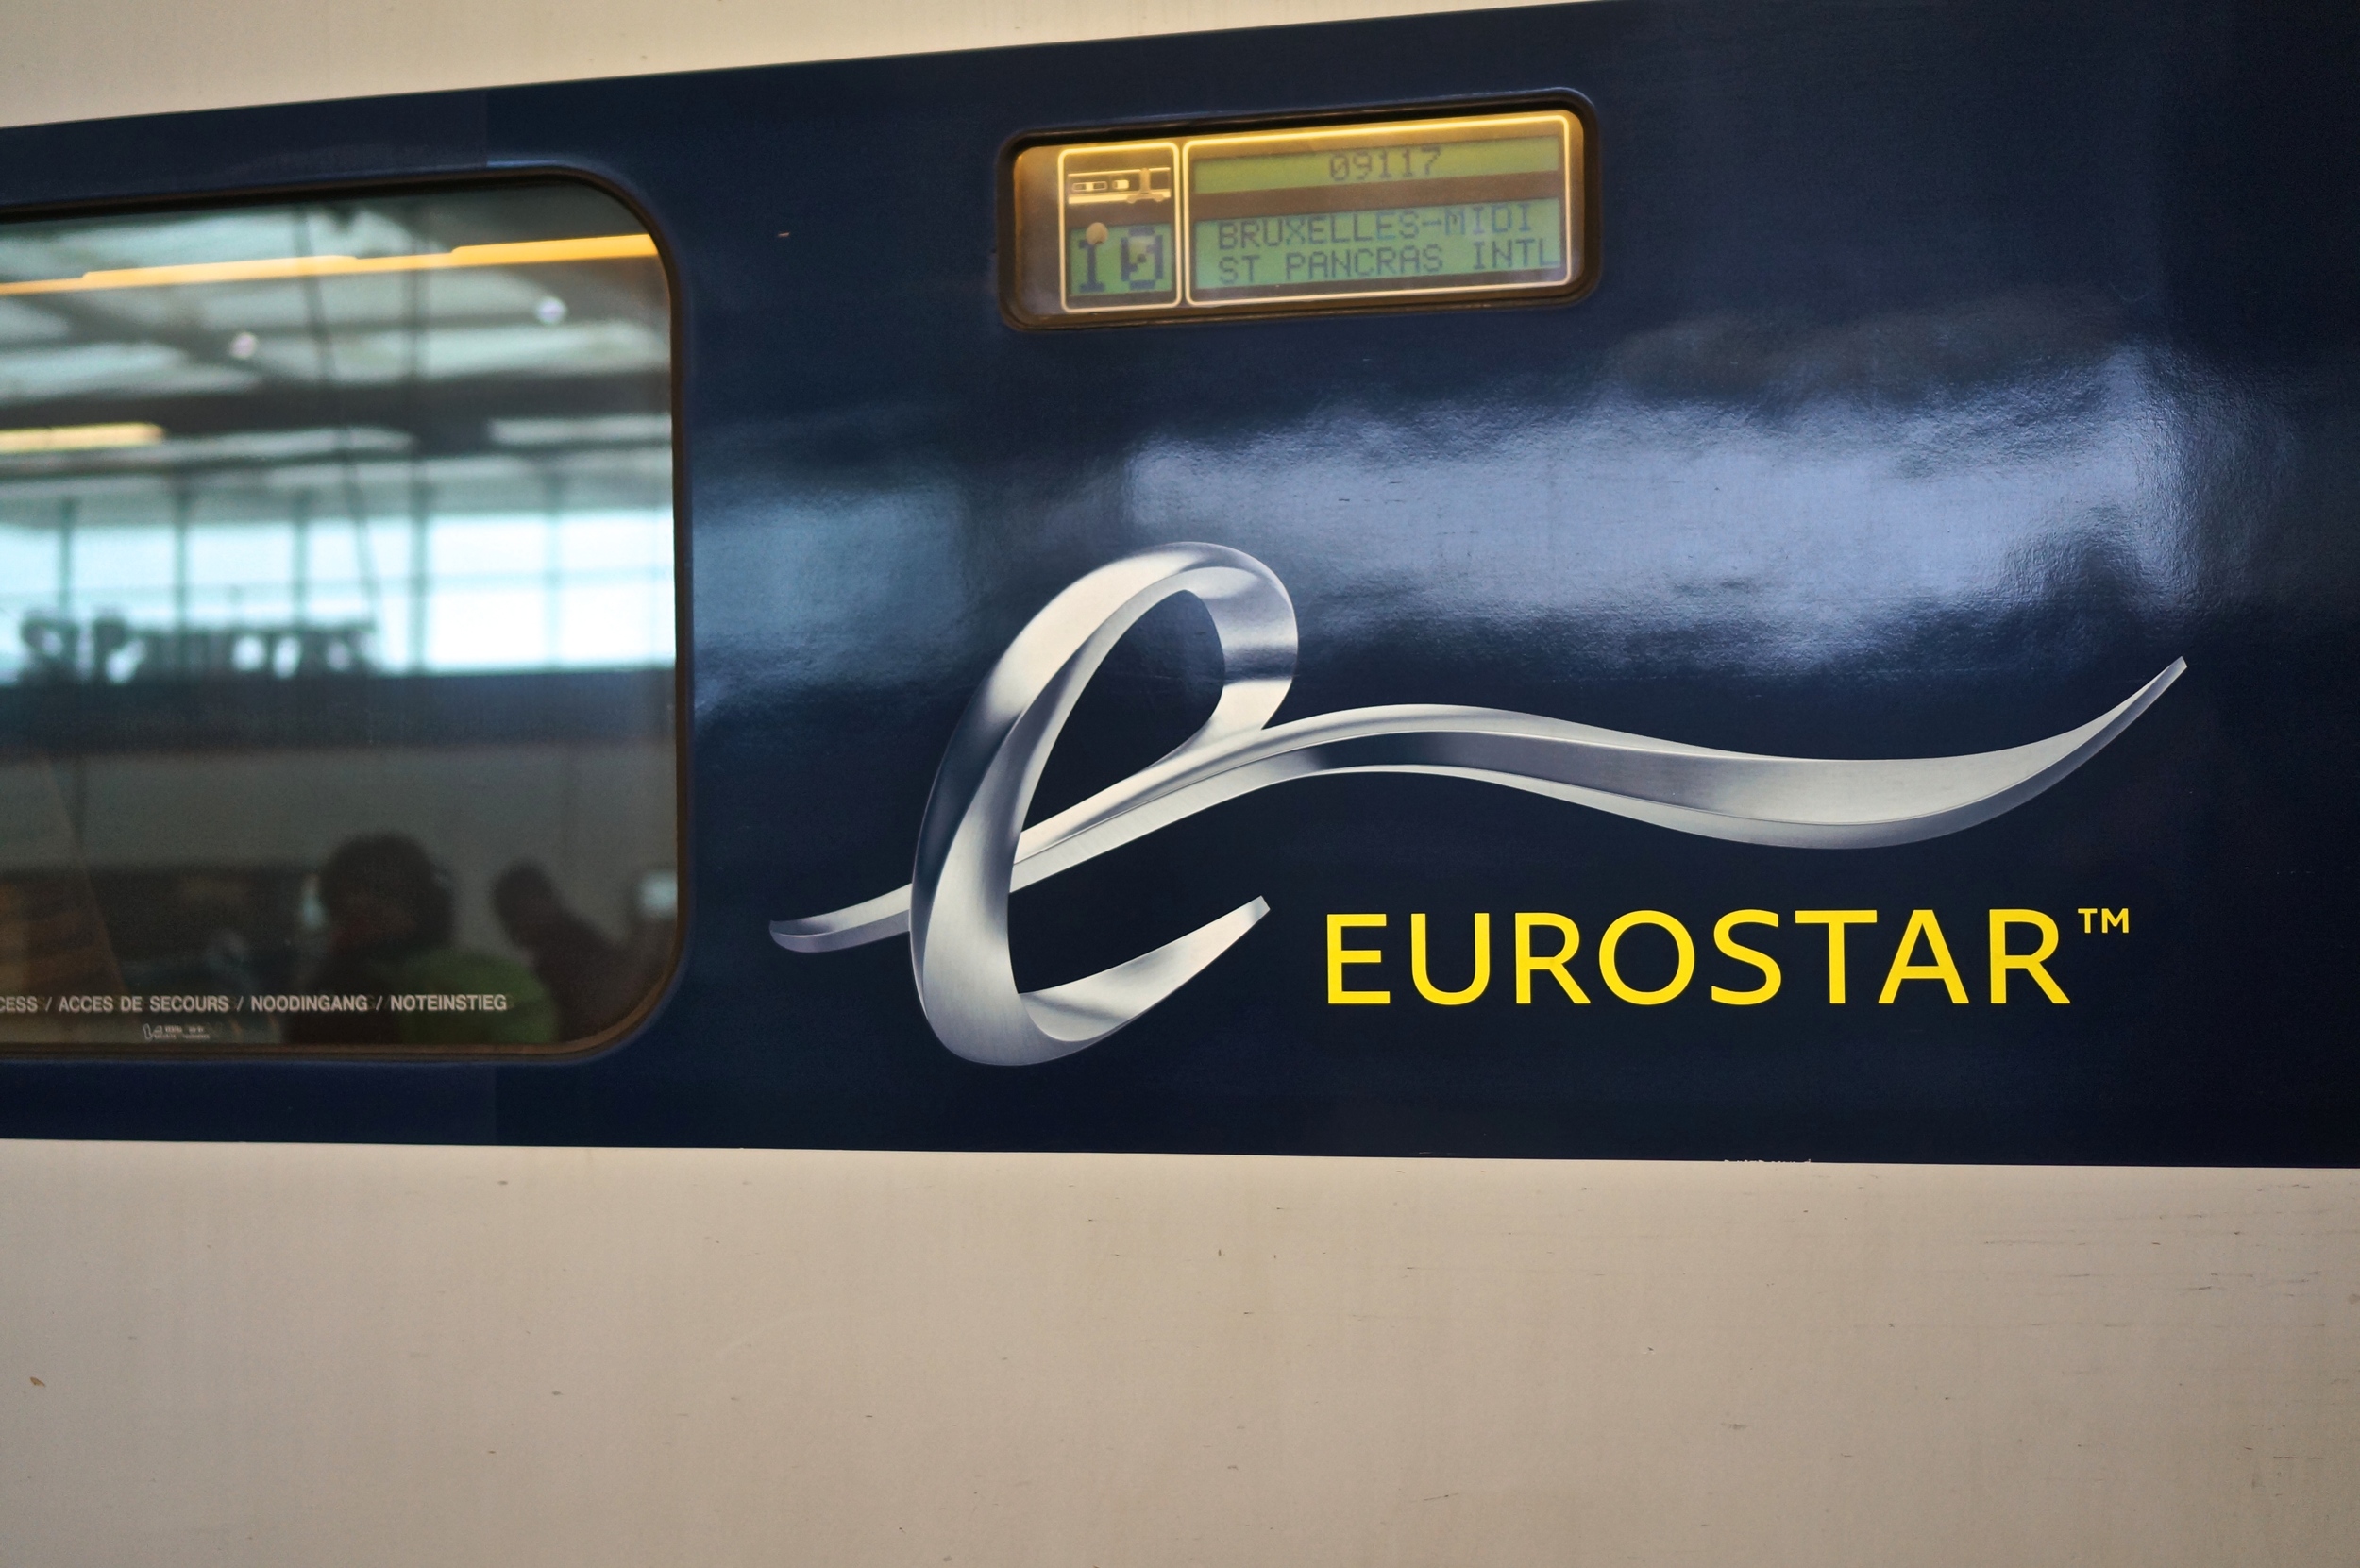 London to the Continent: Why this New Yorker Loves Eurostar